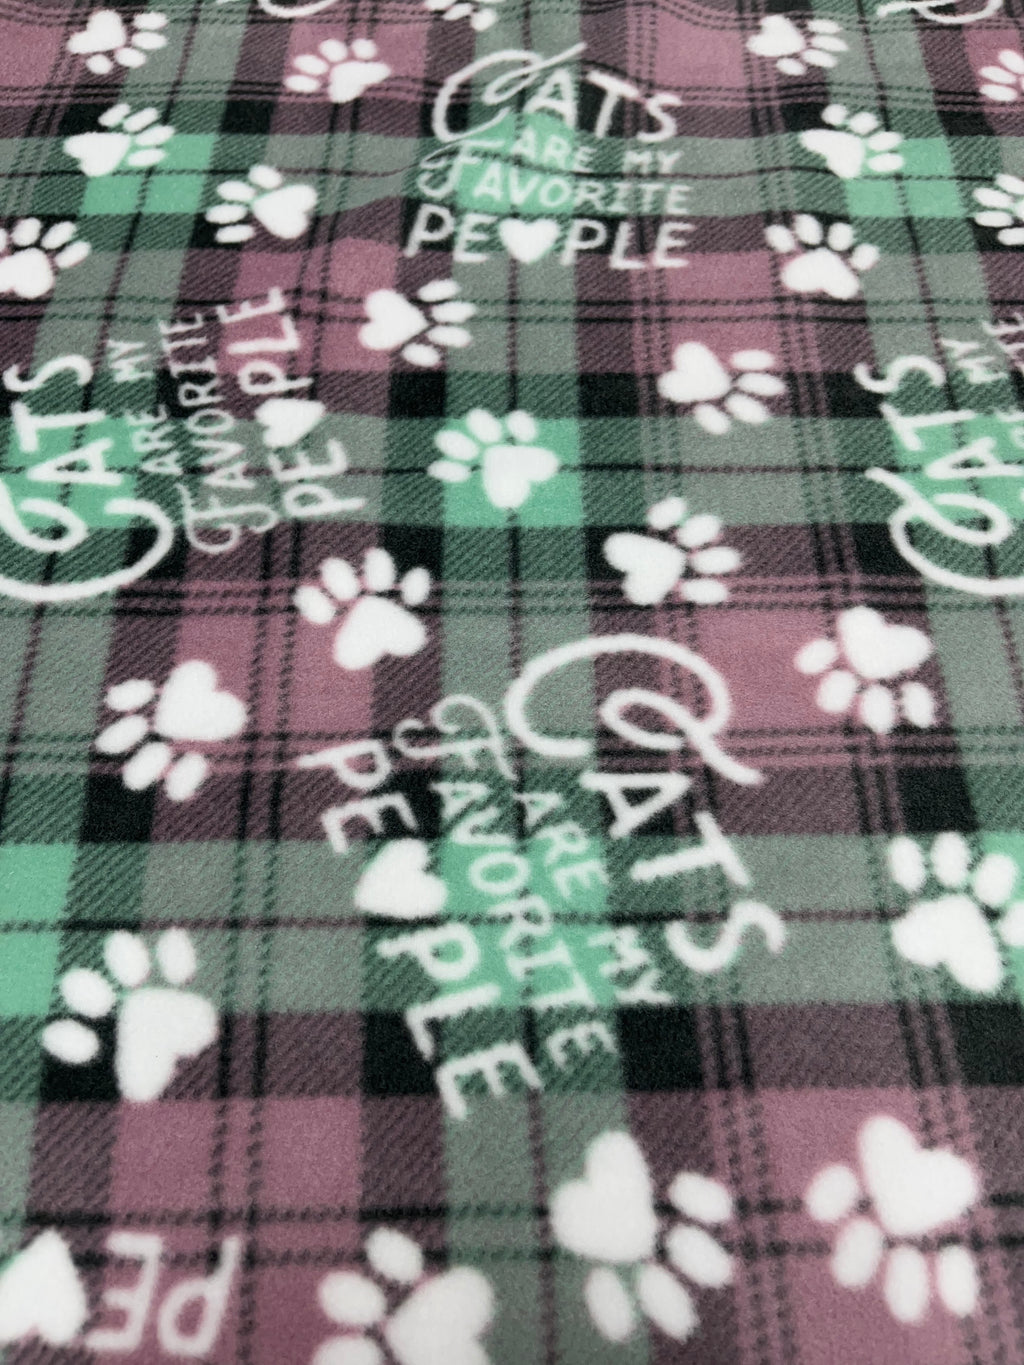 Cats Are My Favorite People Blanket w/Paw Print Minky